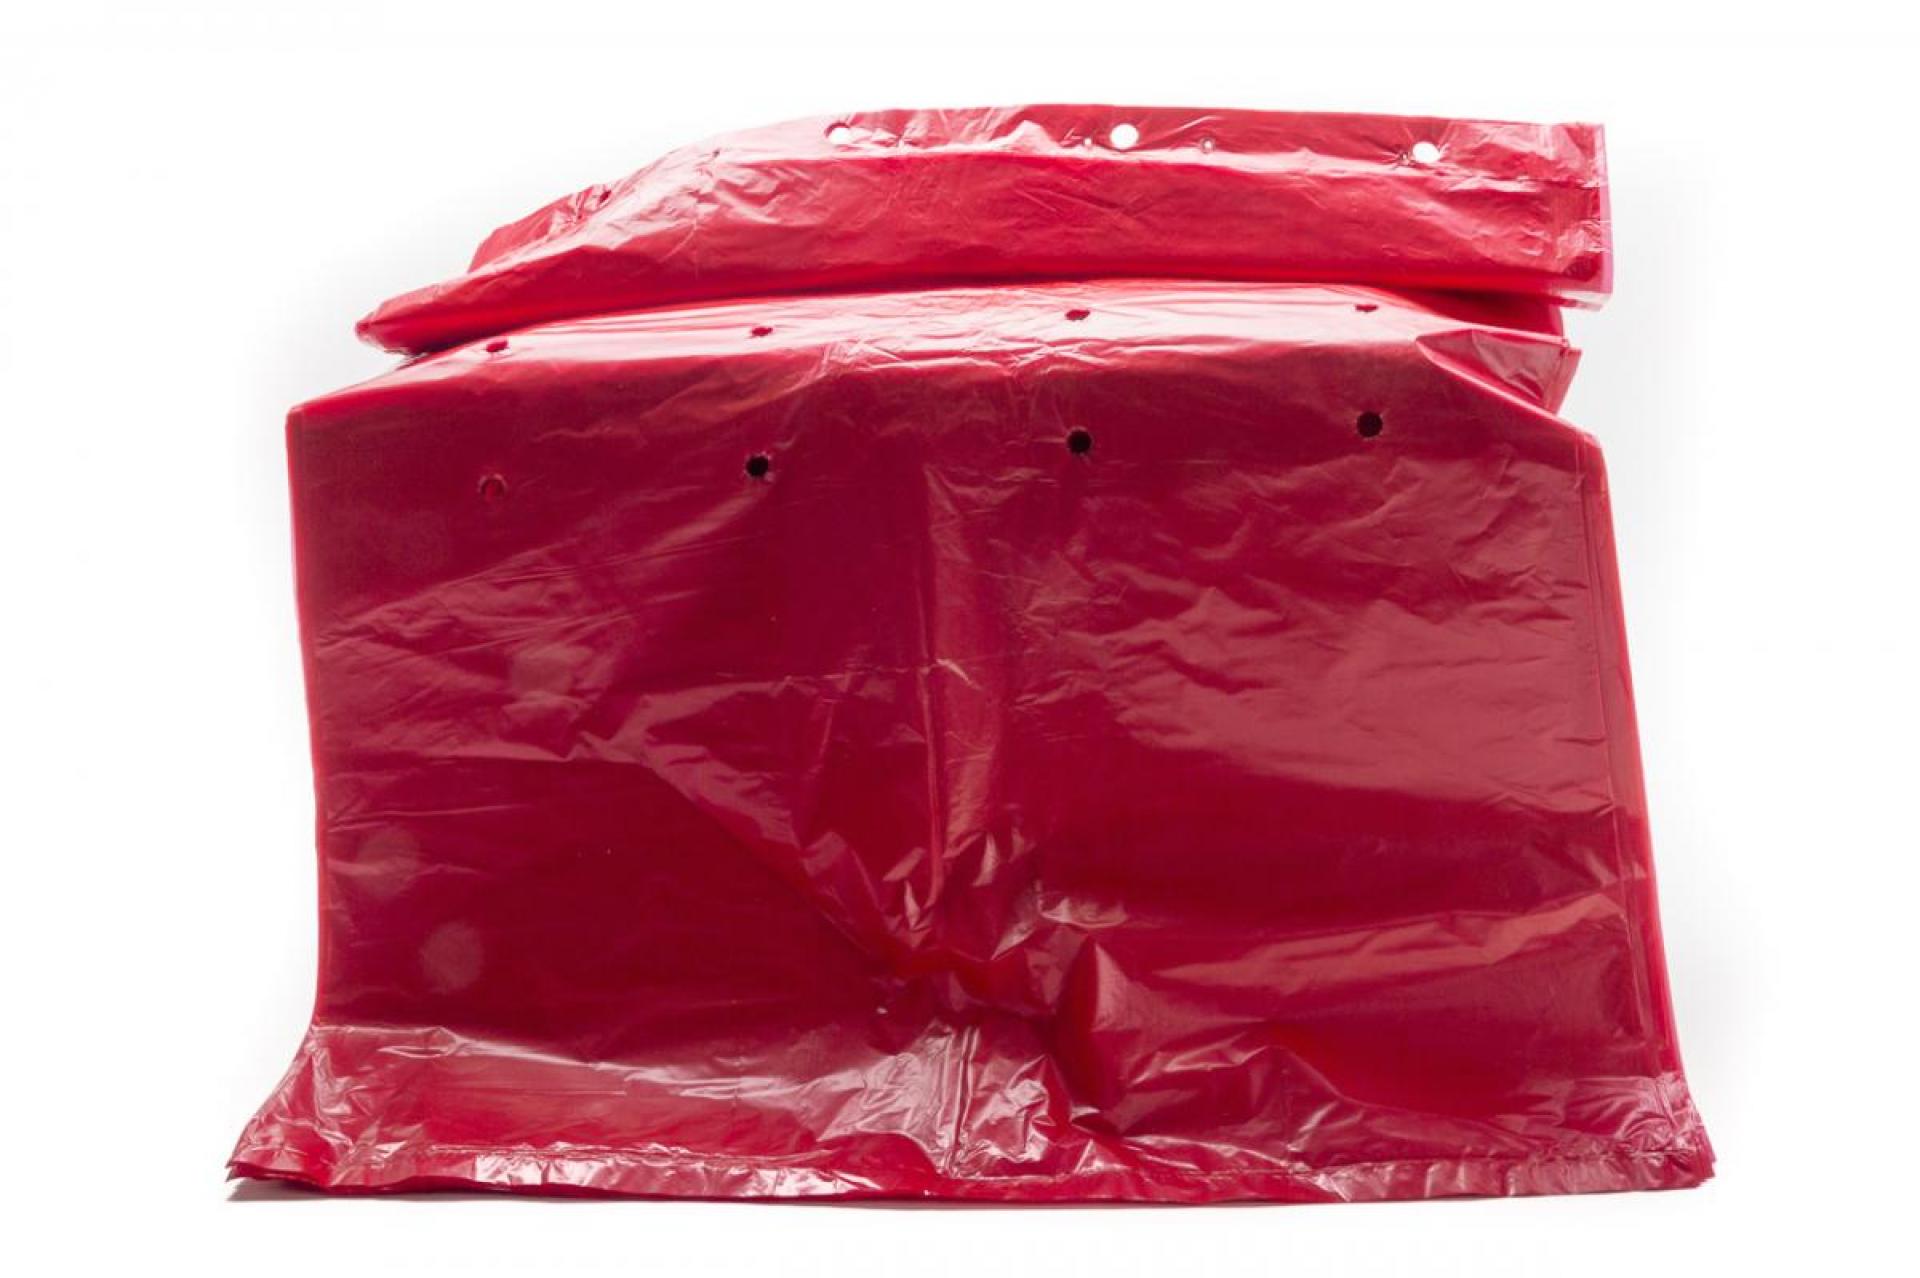 Dropship Pack Of 1000 Red Biohazard Liners 24 X 33 Thickness 11 Micron.  37-50 LB Disposable HDPE Bags 24x33. Pre-Printed Poly Bags For Disposing  Waste. Plastic Bags For Health Applications. to Sell